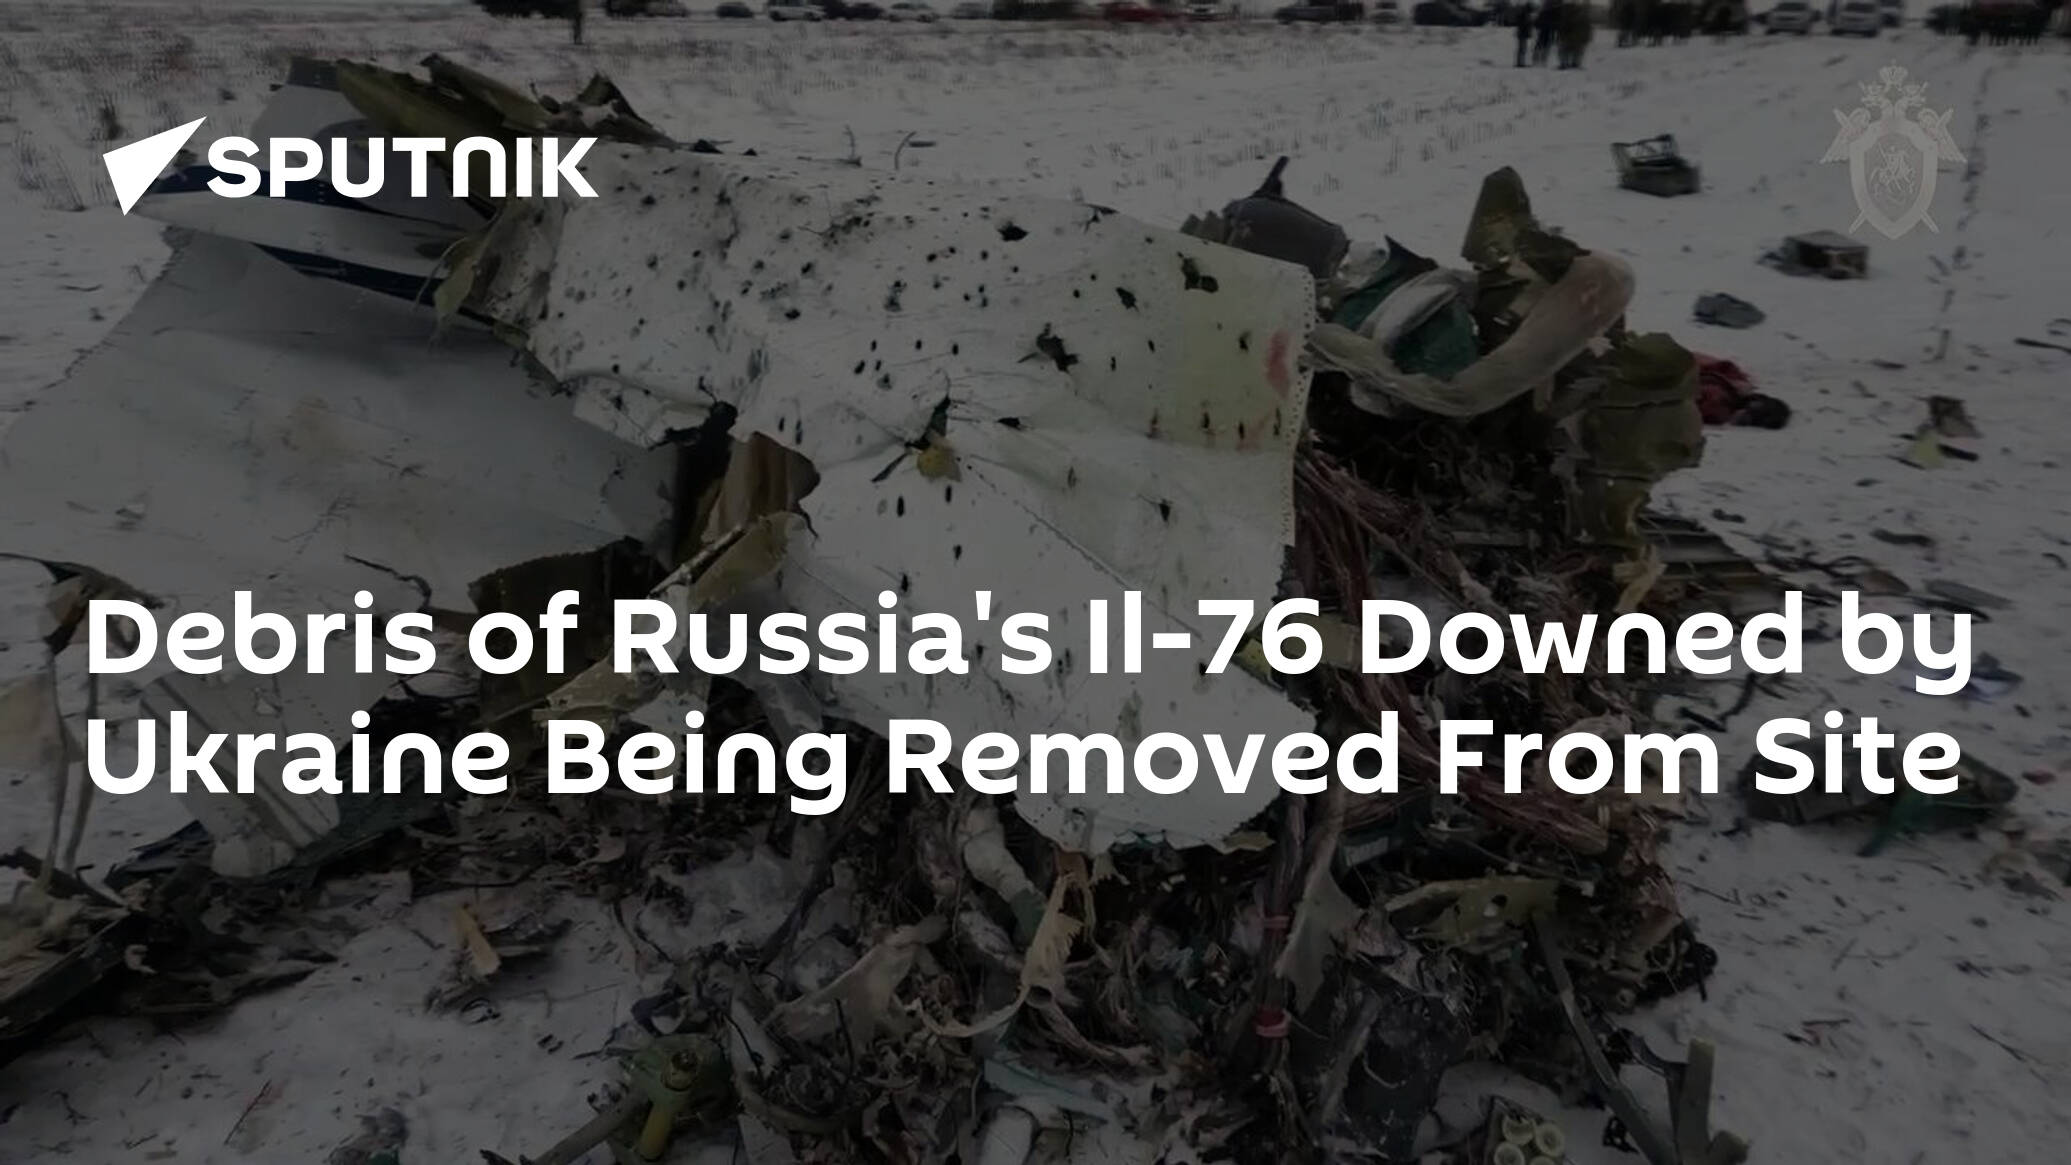 Debris of Russia's Il-76 Downed by Ukraine Being Removed From Site